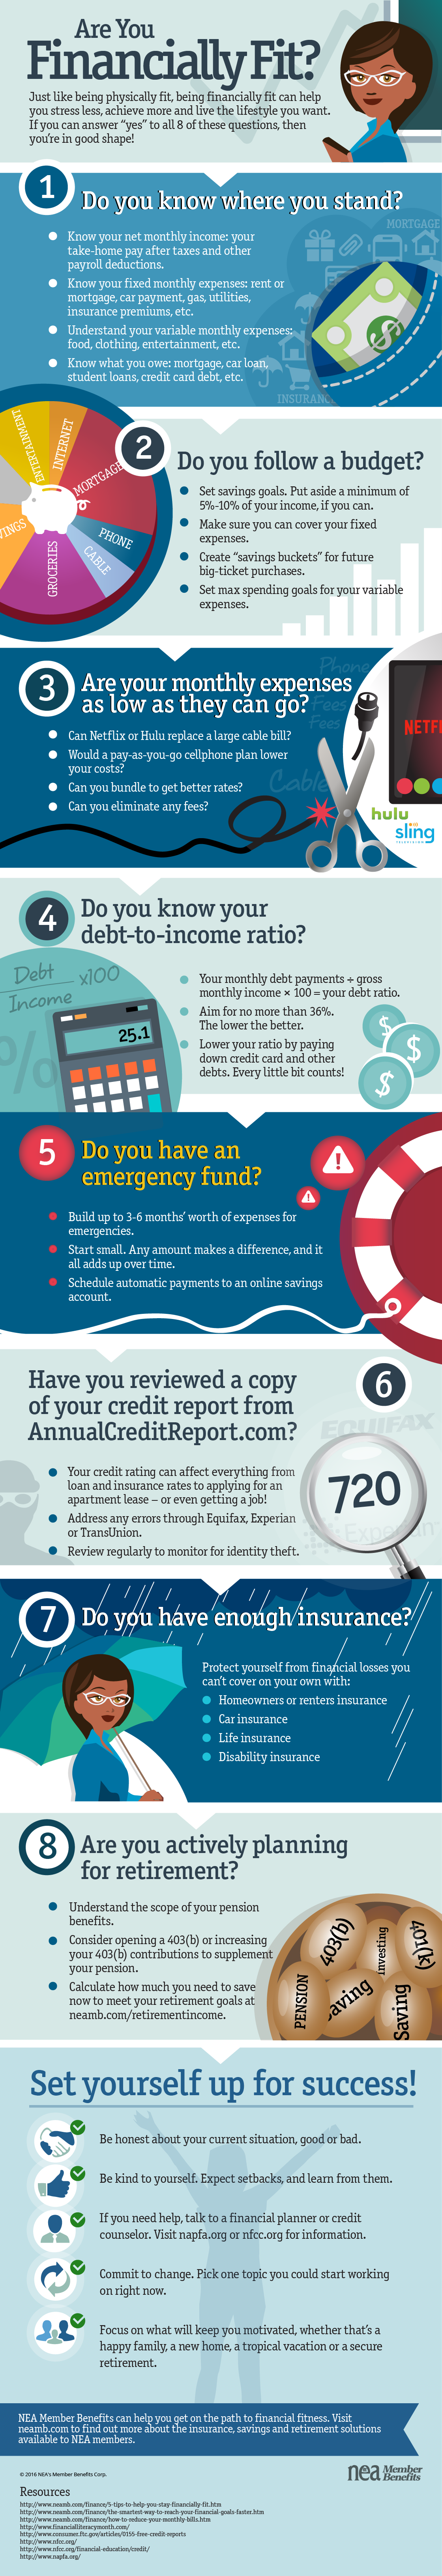 Are You Financially Fit Infographic